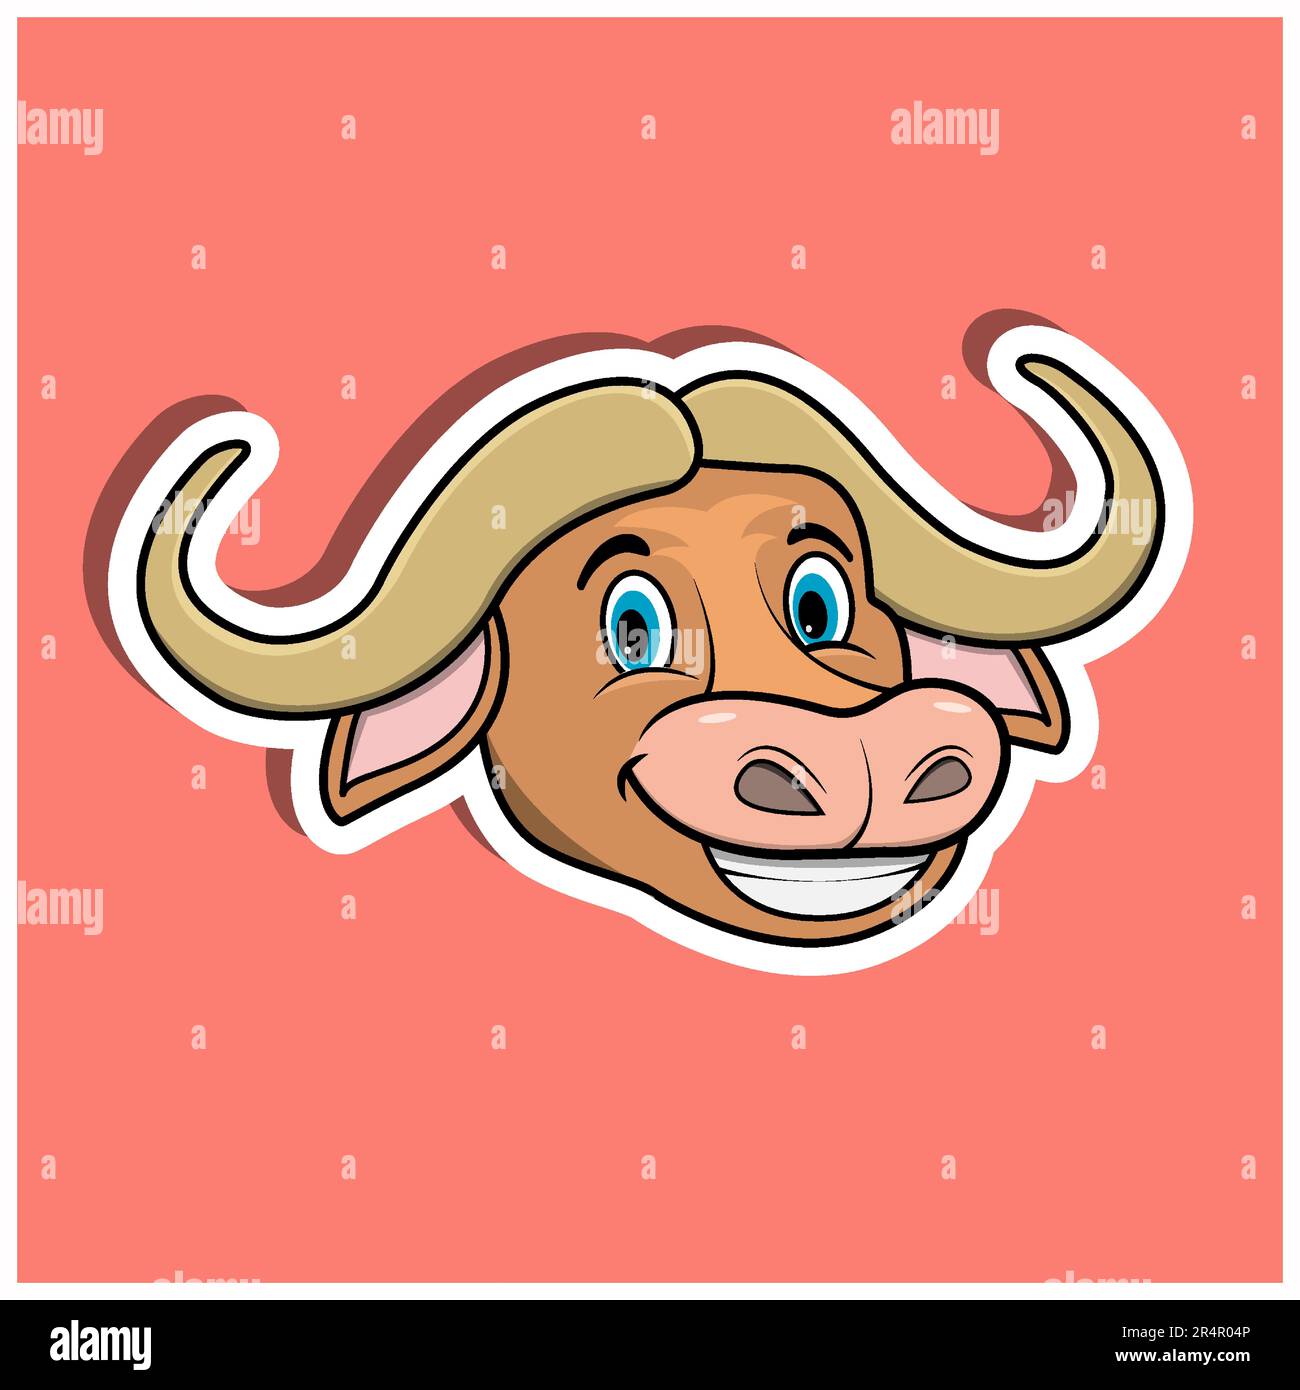 Animal Face Sticker With  Buffalo Character Design. Vector and Illustration Stock Vector